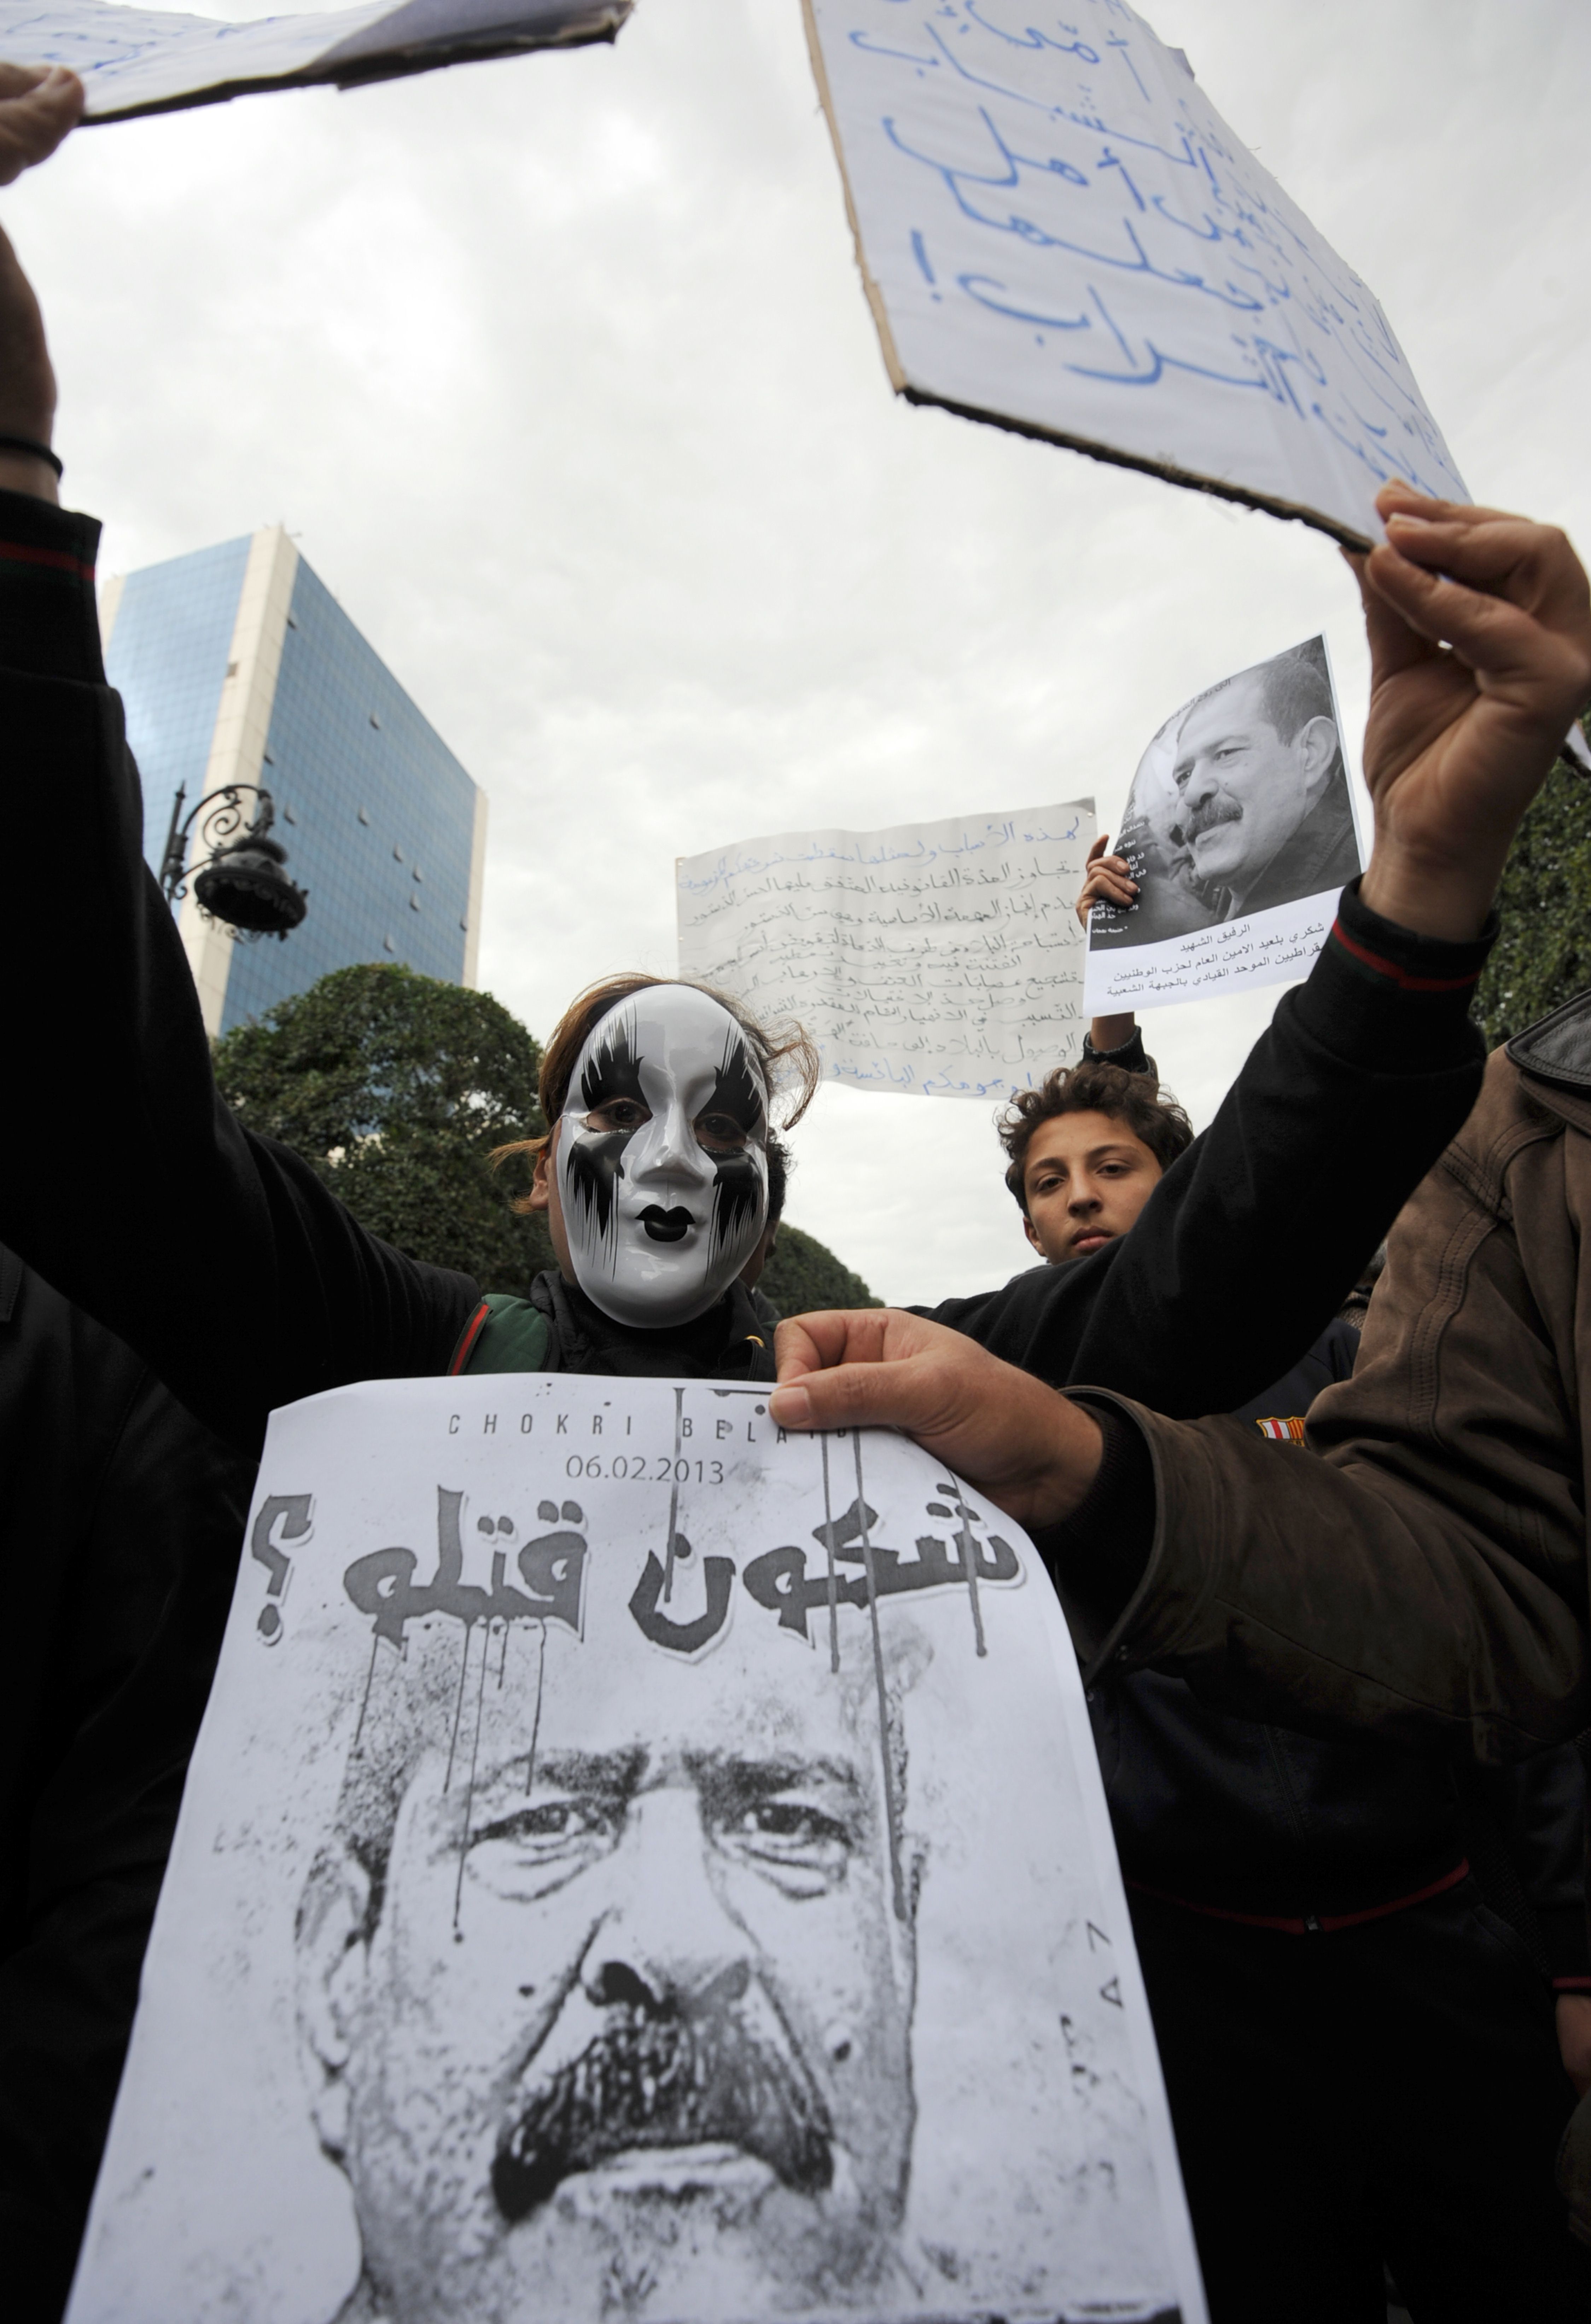 Hundreds of demonstrators marched to protest against the Islamist party Ennahda in power, and demanded that Belaid's killers be found. (AFP Photo)